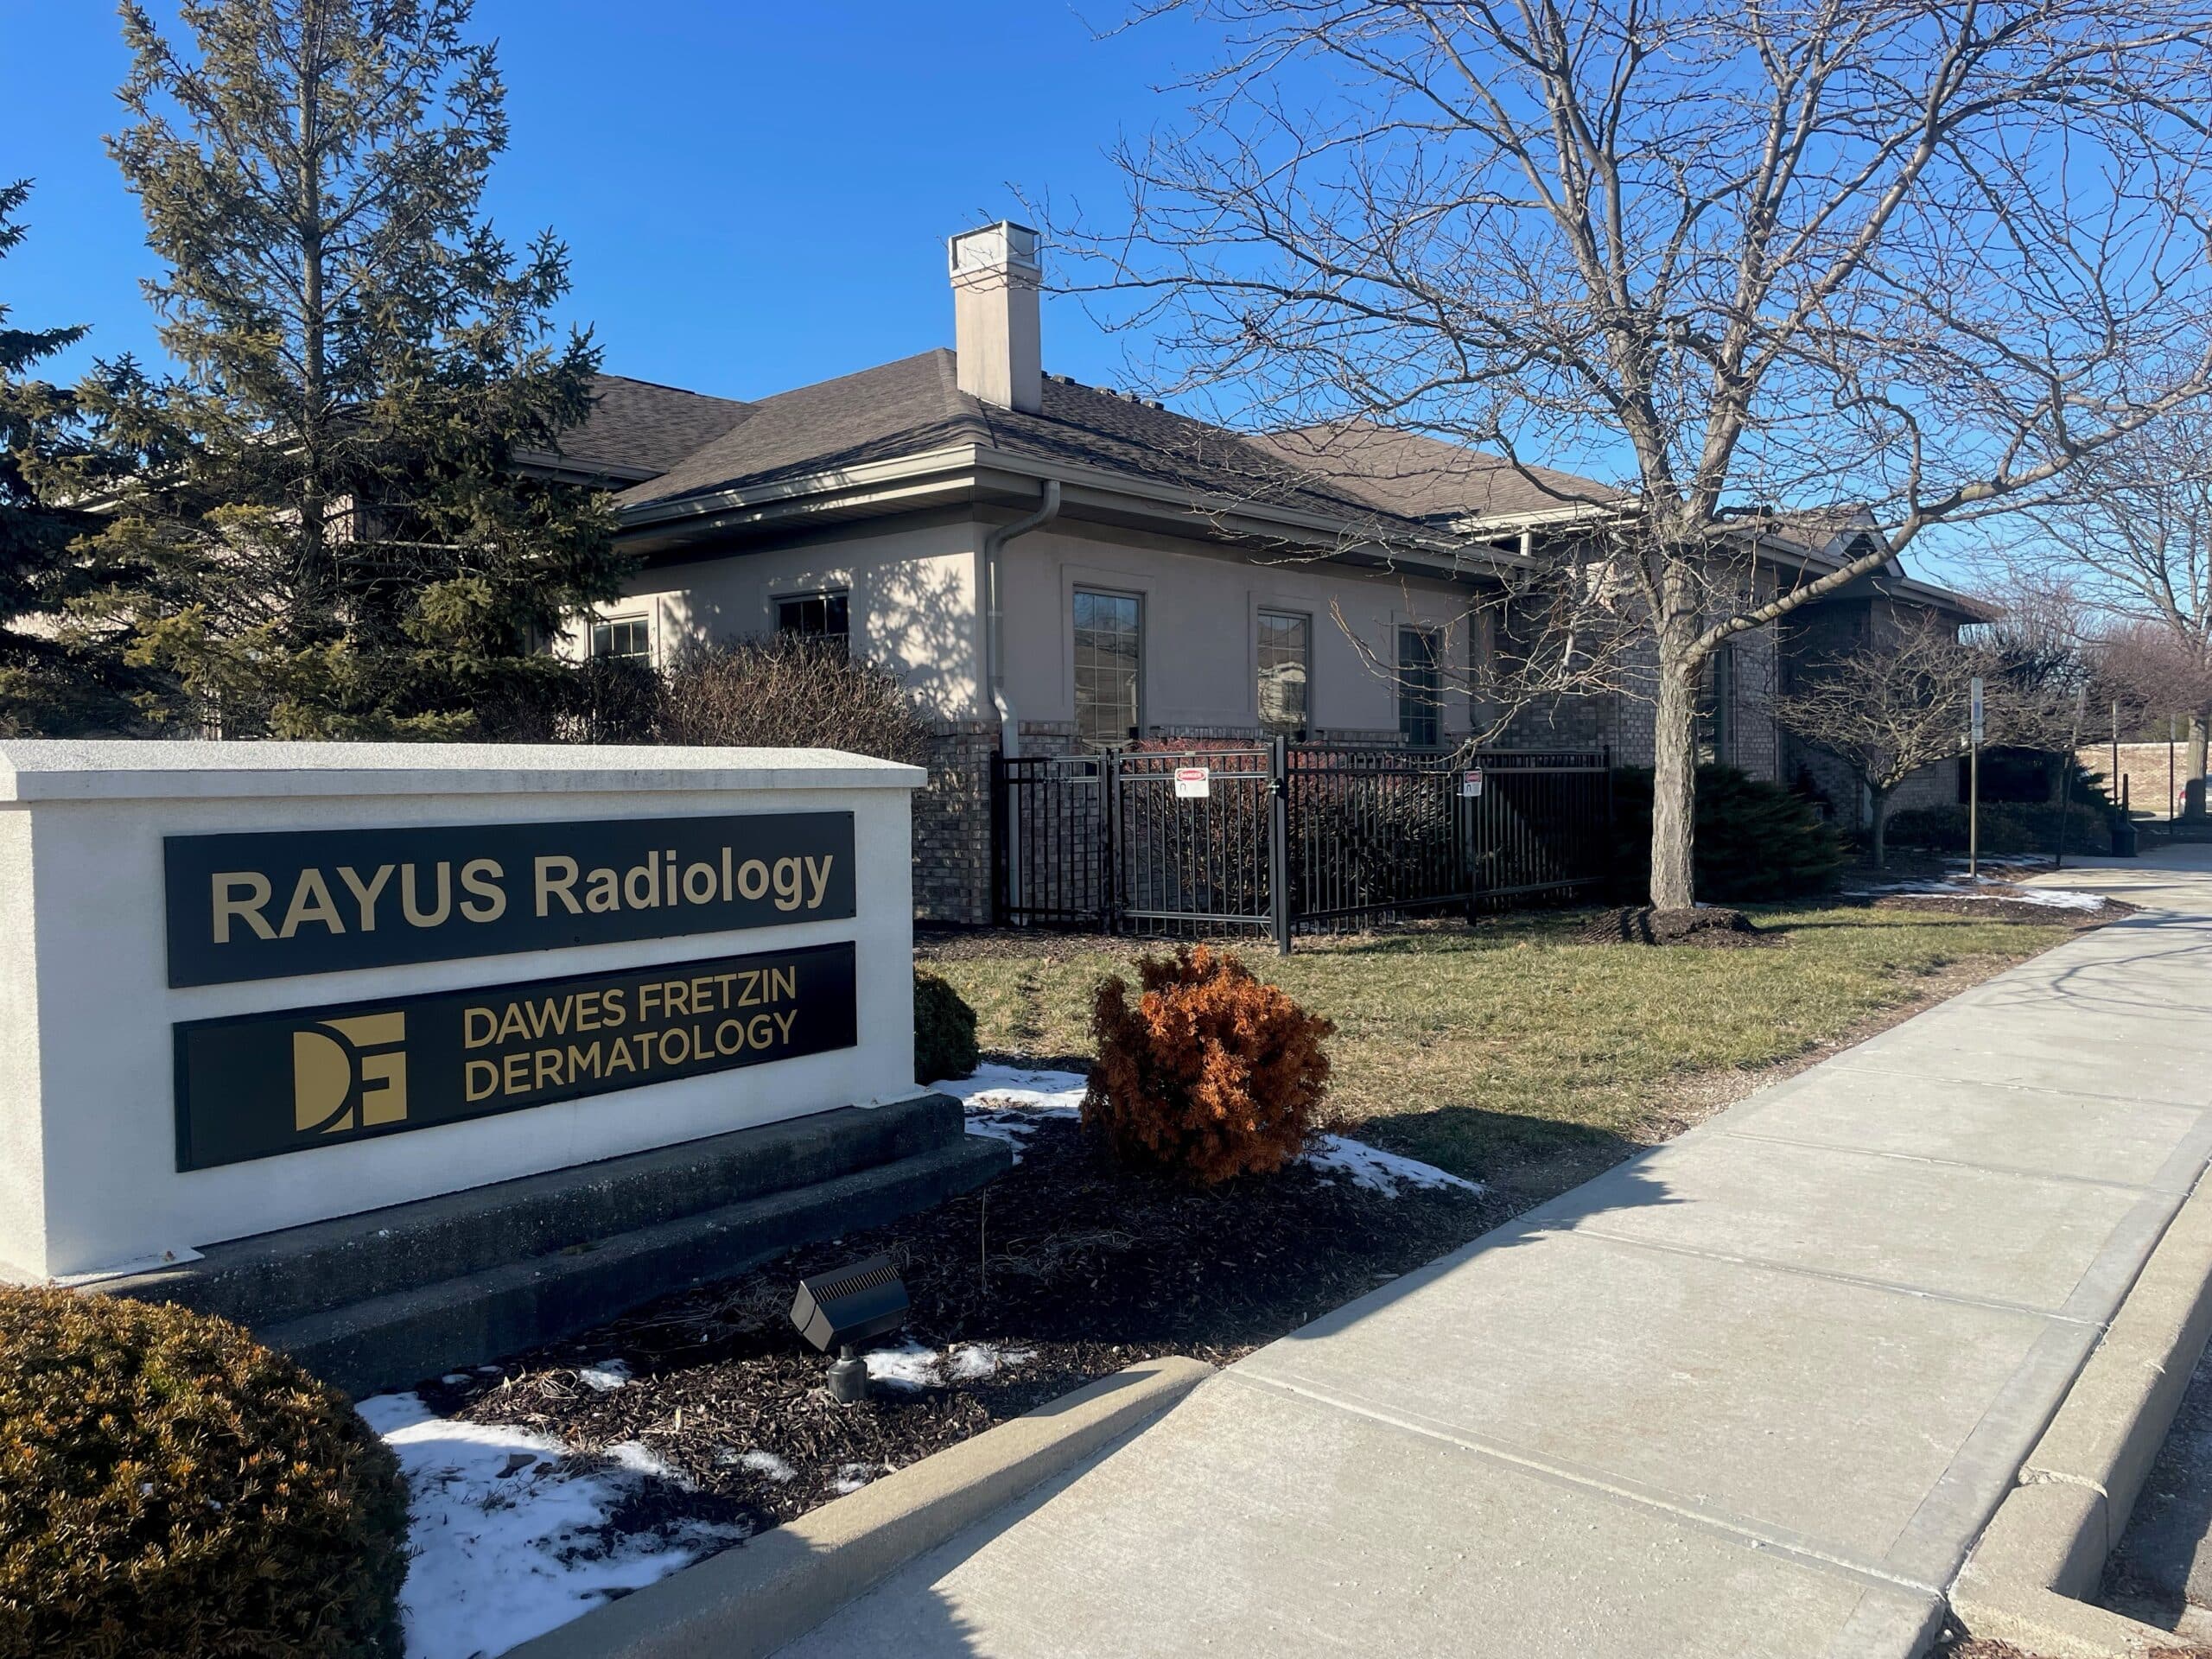 RAYUS Radiology indianapolis indiana east post road center exterior photo